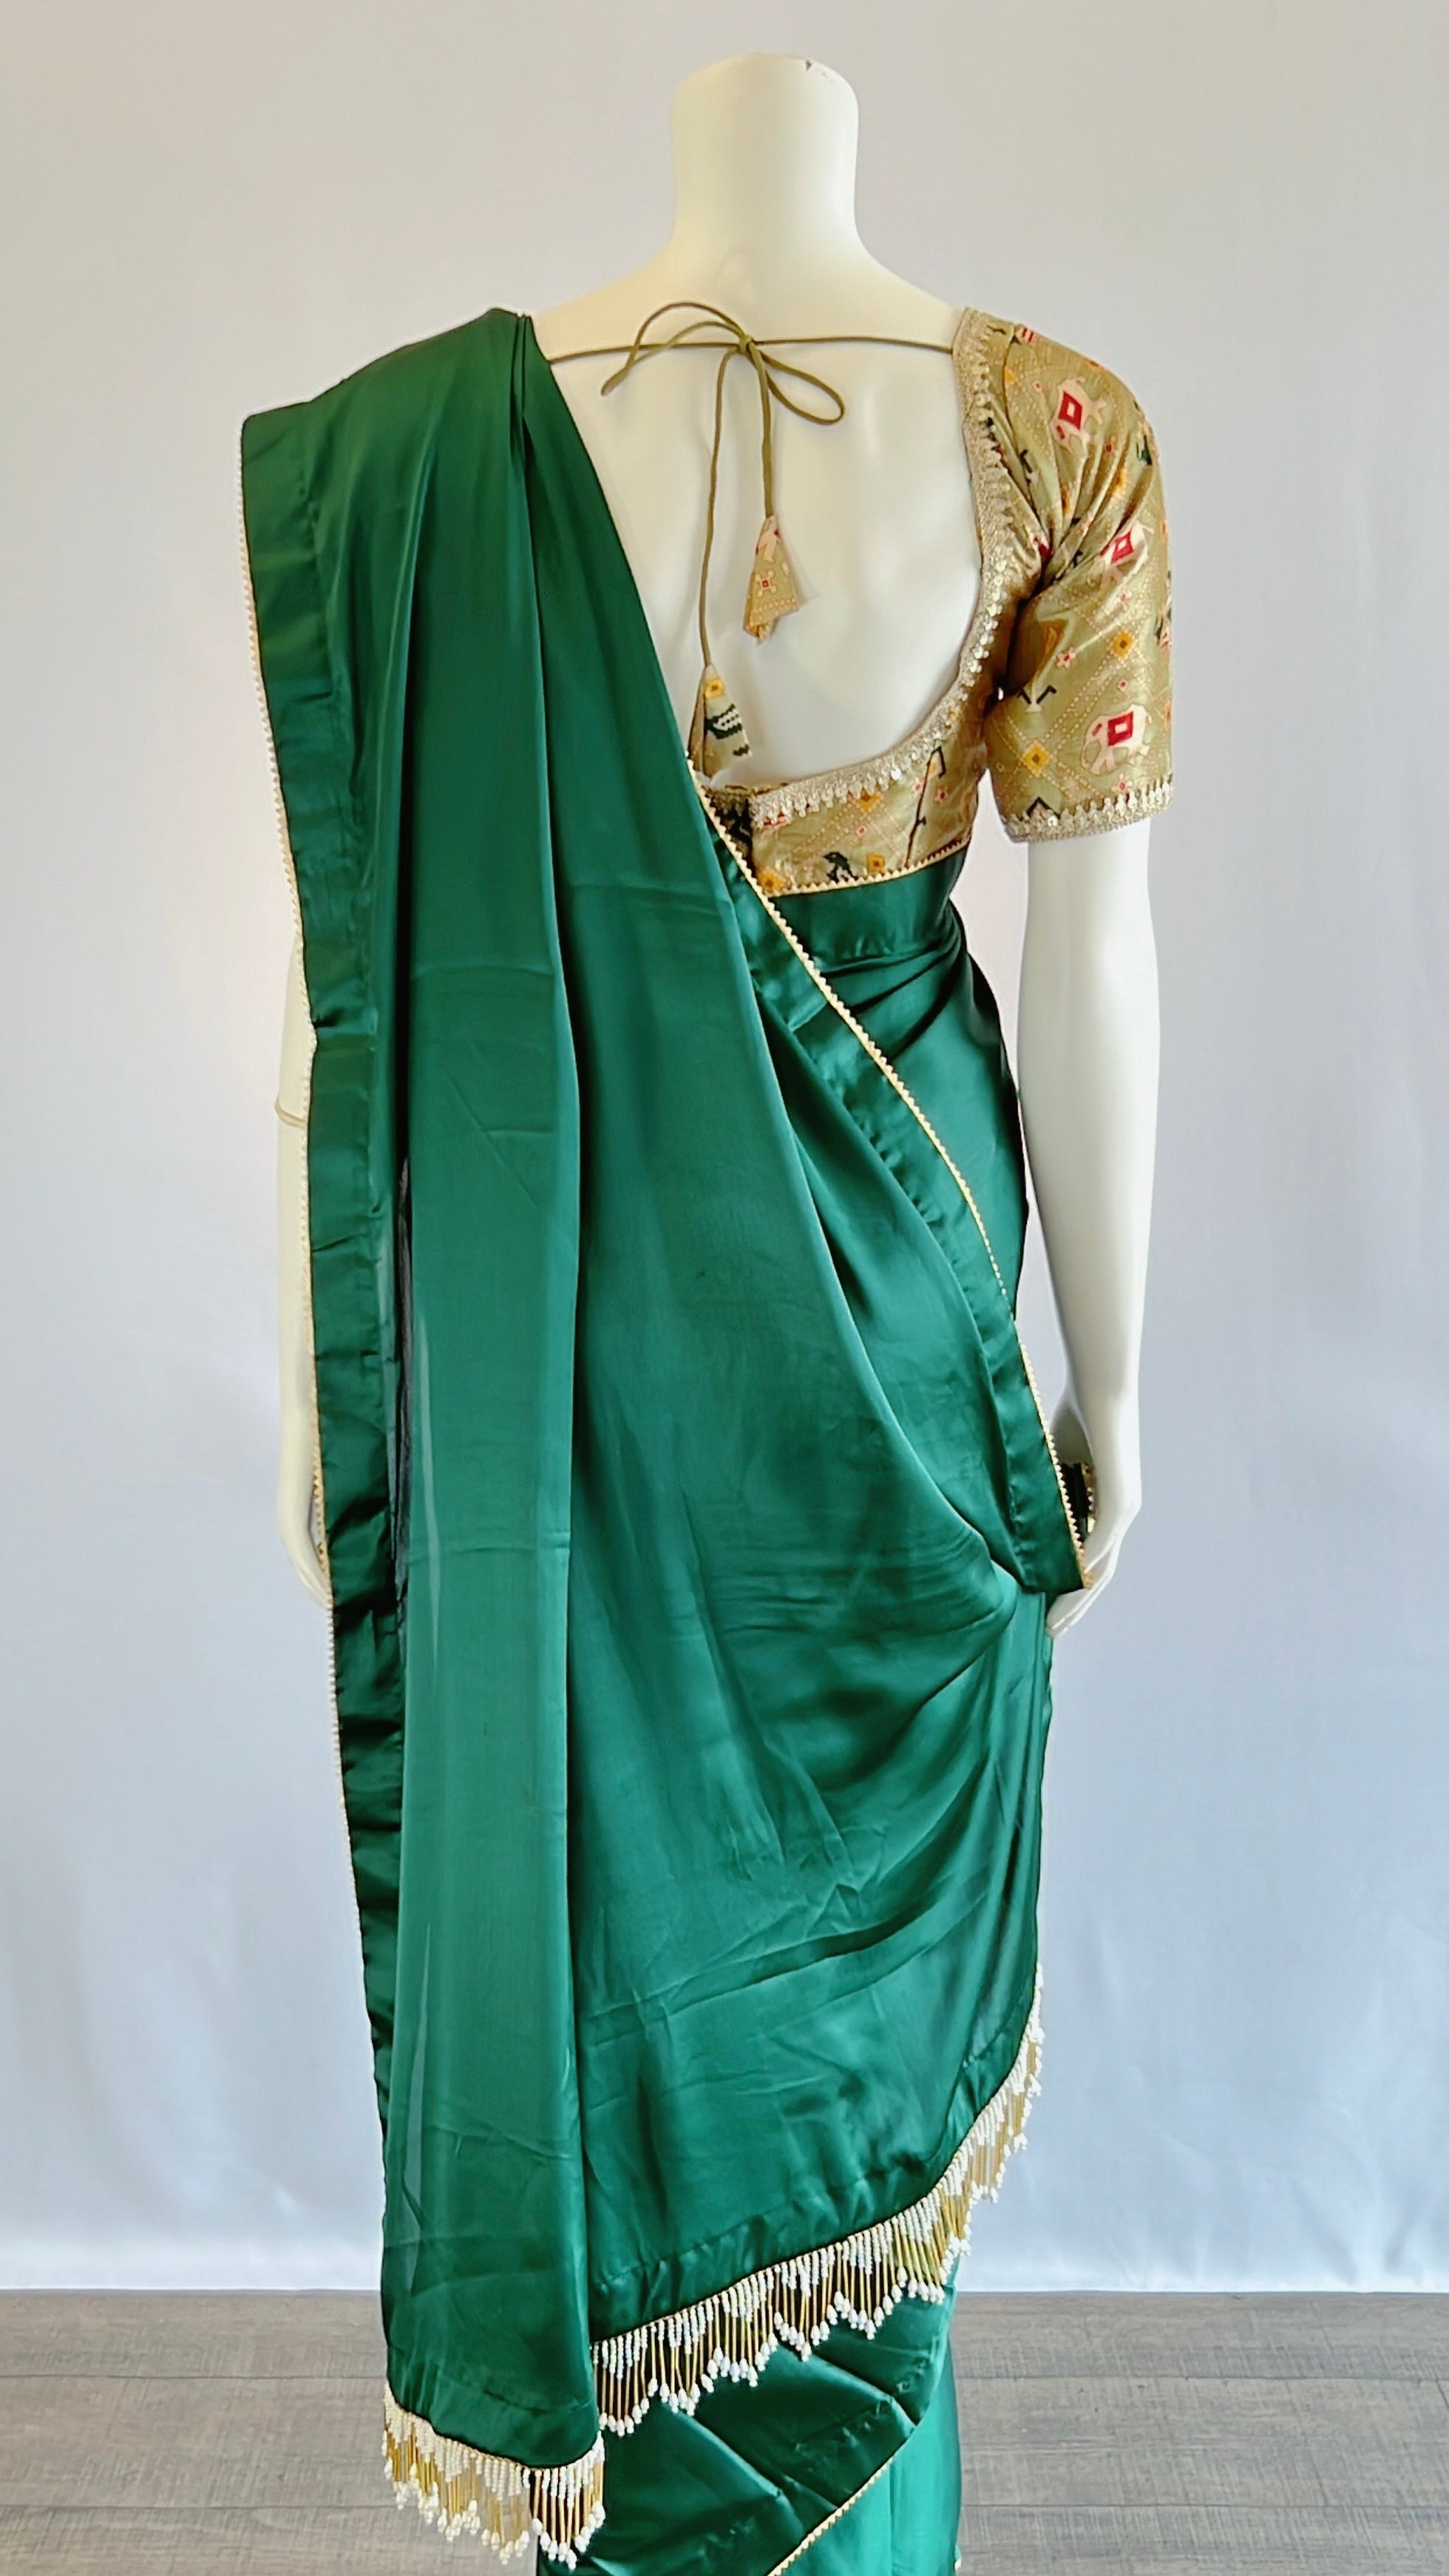 Exquisite Emerald Green Satin Silk Saree with Pre-Pleated Design and Patola Print Blouse - Perfect Blend of Elegance and Tradition for Discerning Women